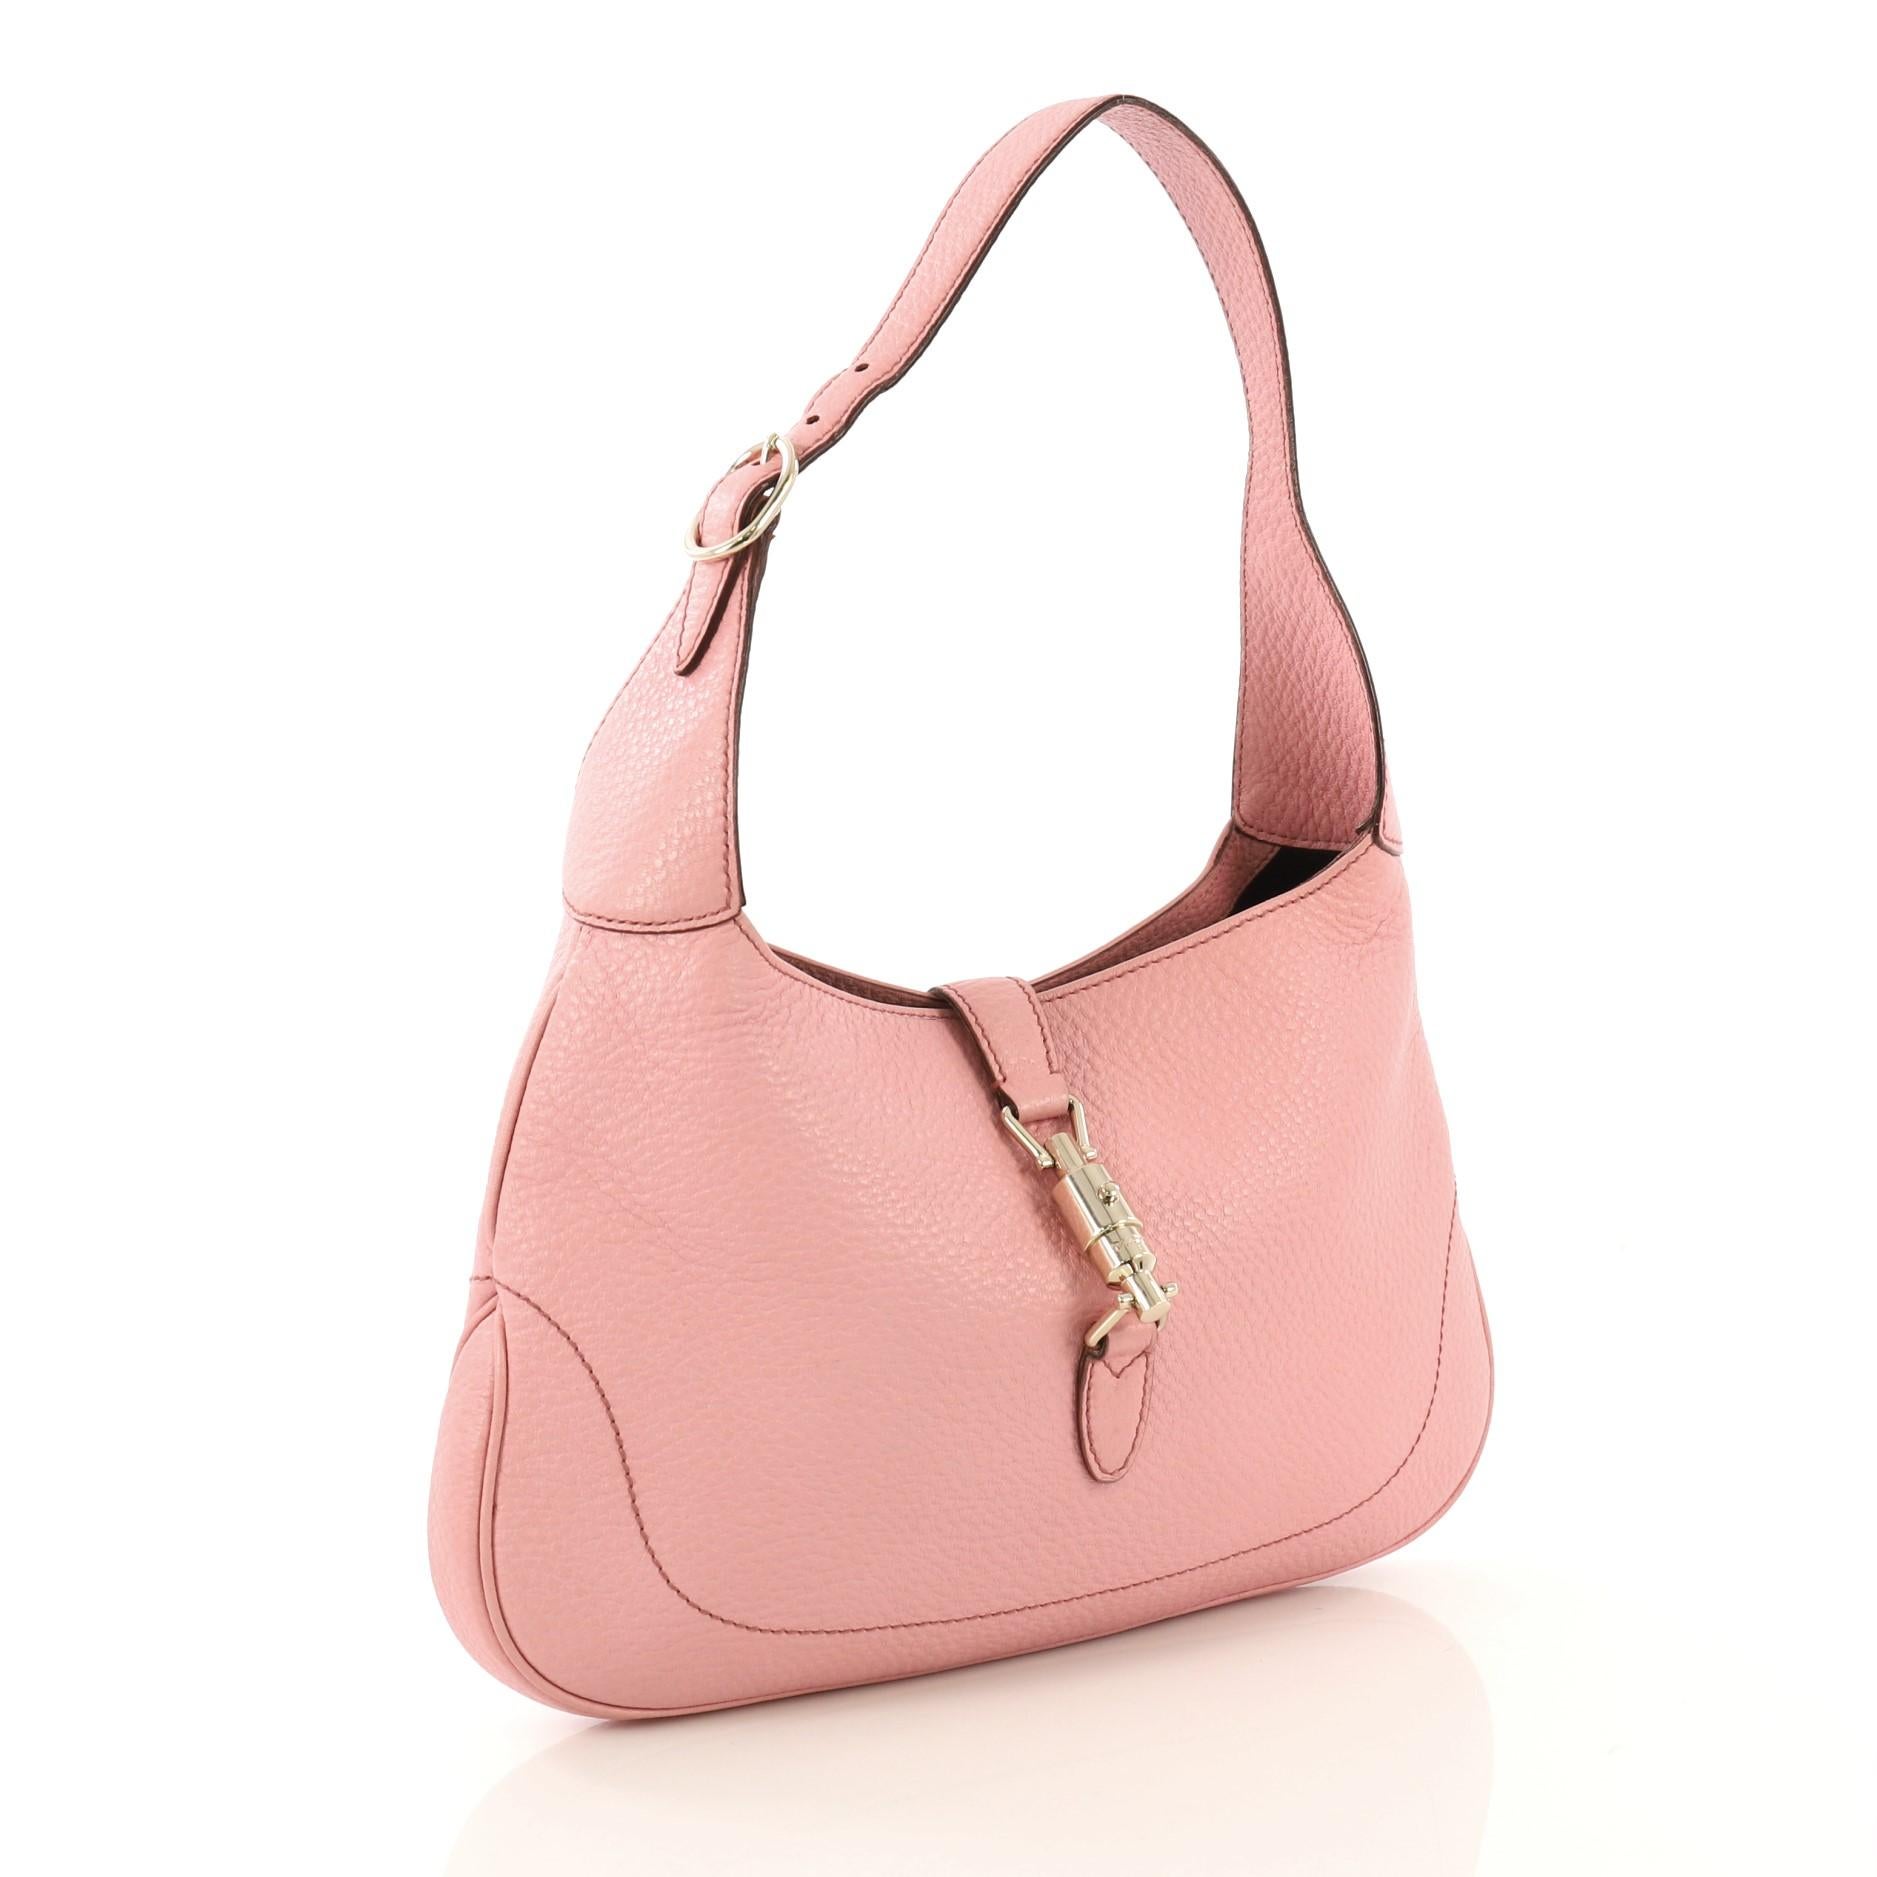 This Gucci Jackie O Bouvier Hobo Leather Medium, crafted from pink leather, features an adjustable shoulder leather strap and gold-tone hardware. Its piston-strap closure opens to a black leather interior with side zip pocket. 

Estimated Retail